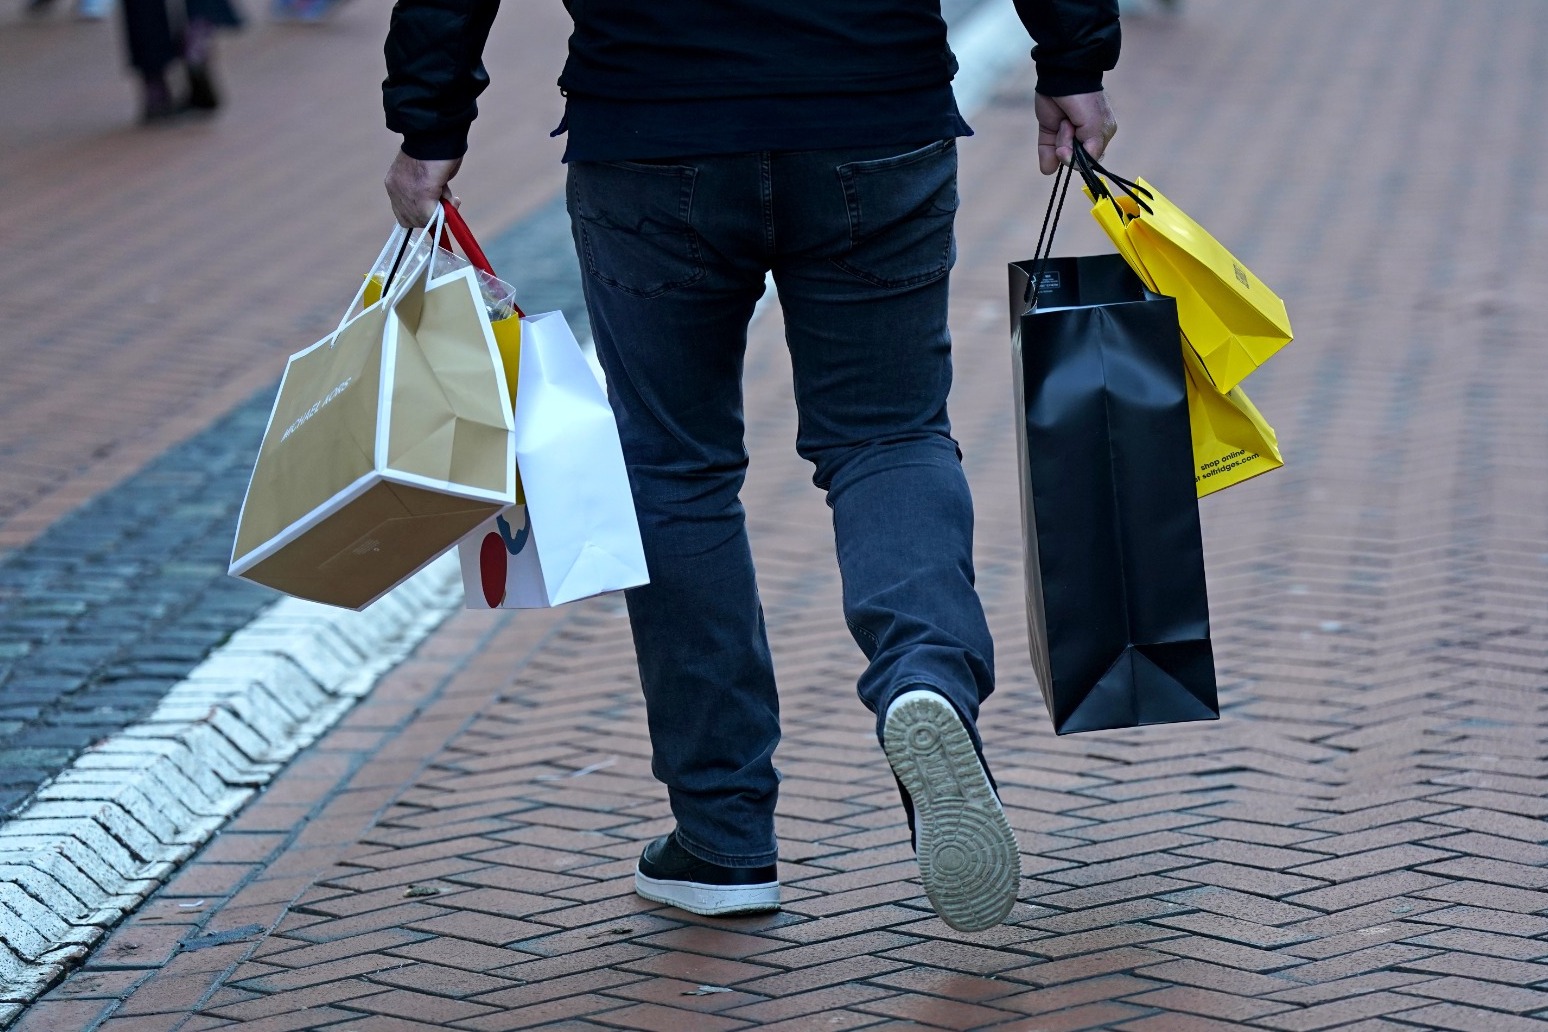 Cost-of-living crisis to push more retailers to brink in 2023, warn experts 